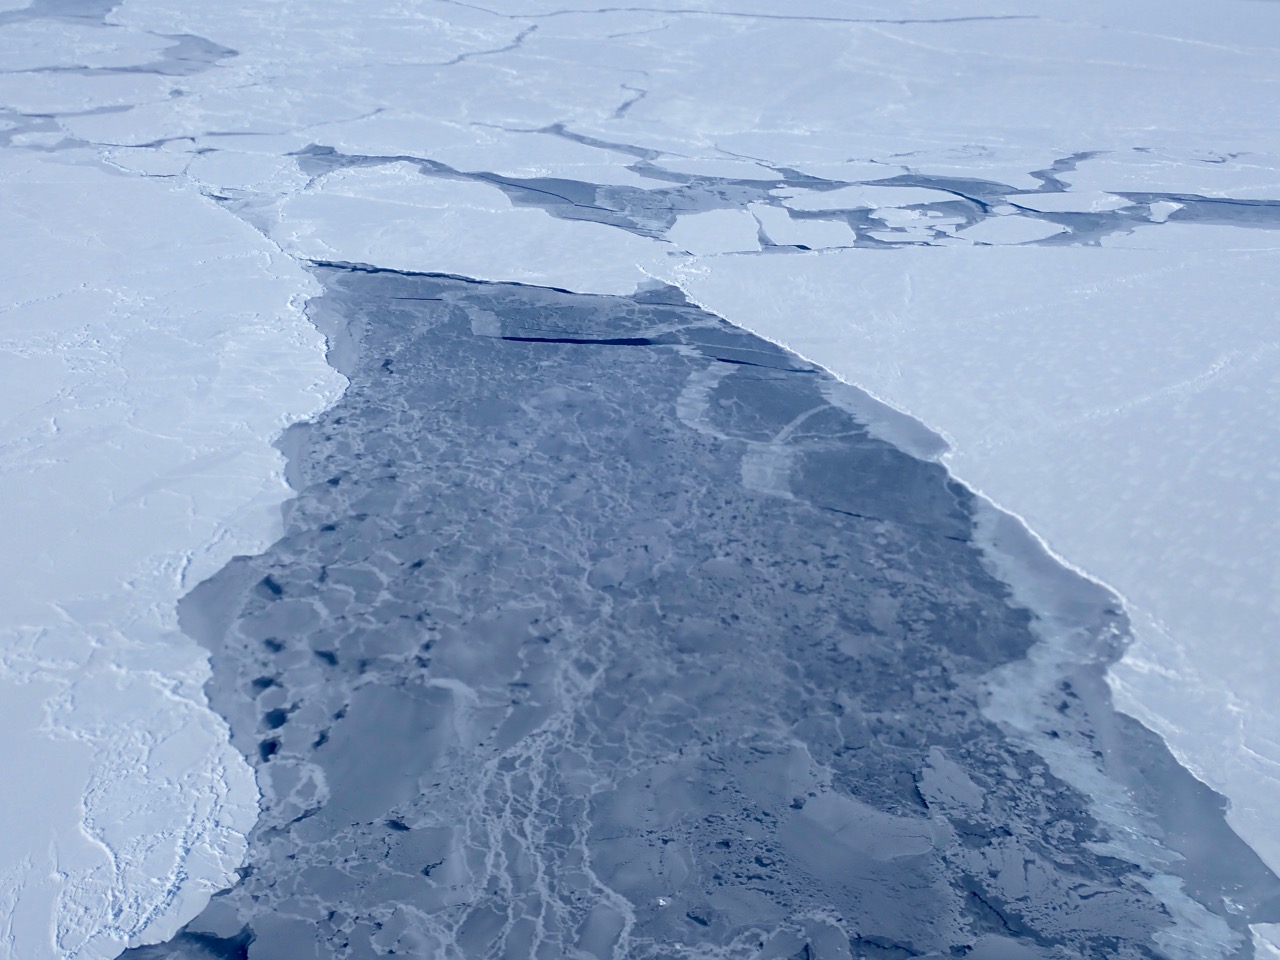 A big lead, or opening in the sea ice pack, in the eastern Beaufort Sea